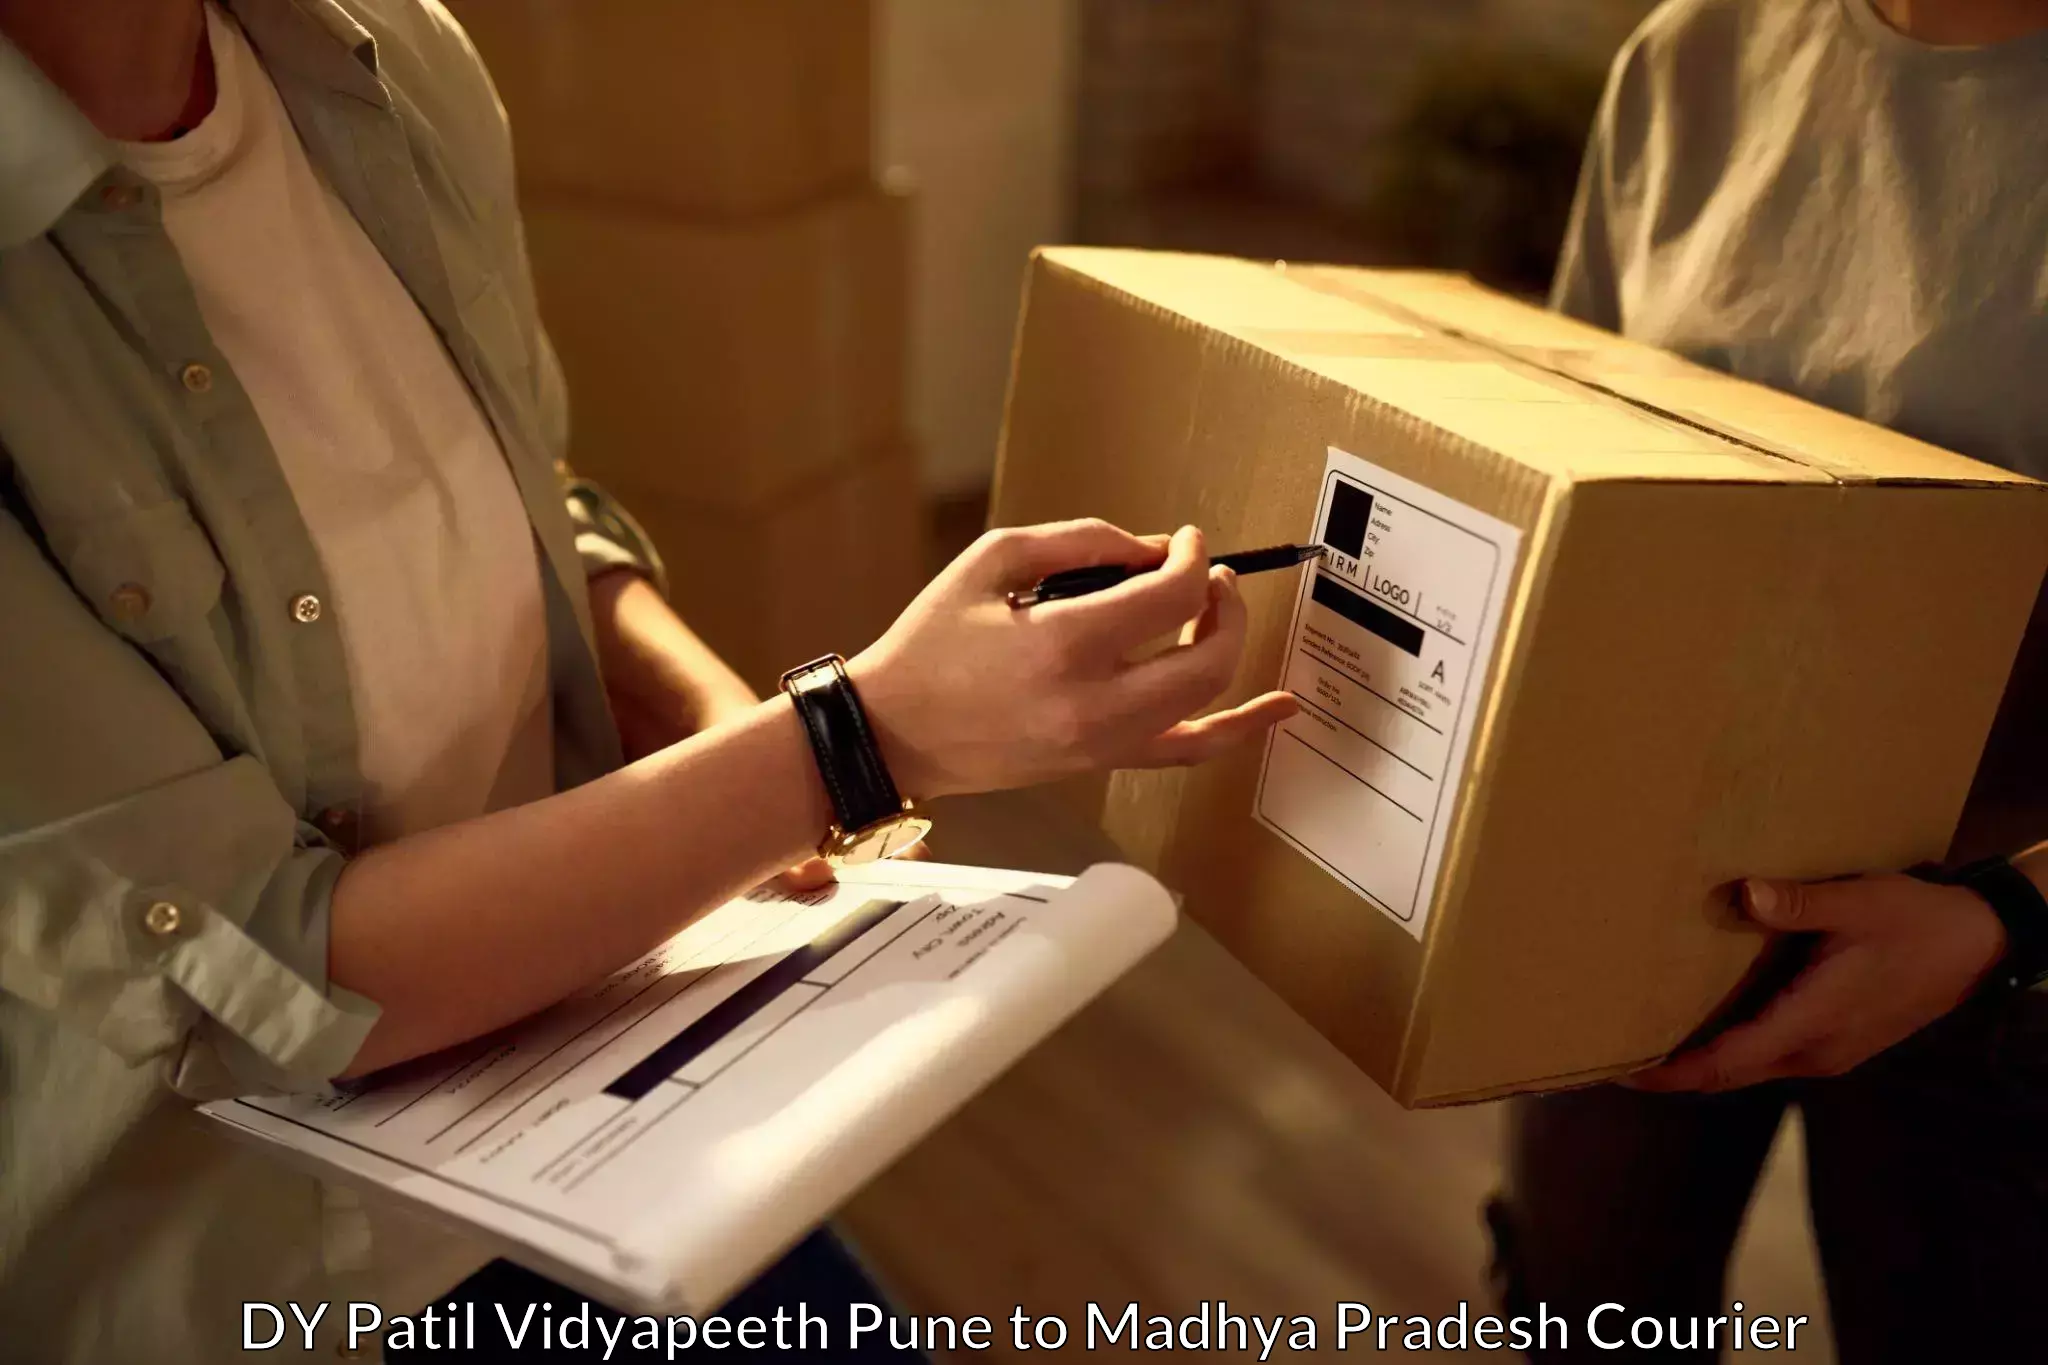 Specialized courier services DY Patil Vidyapeeth Pune to Agar